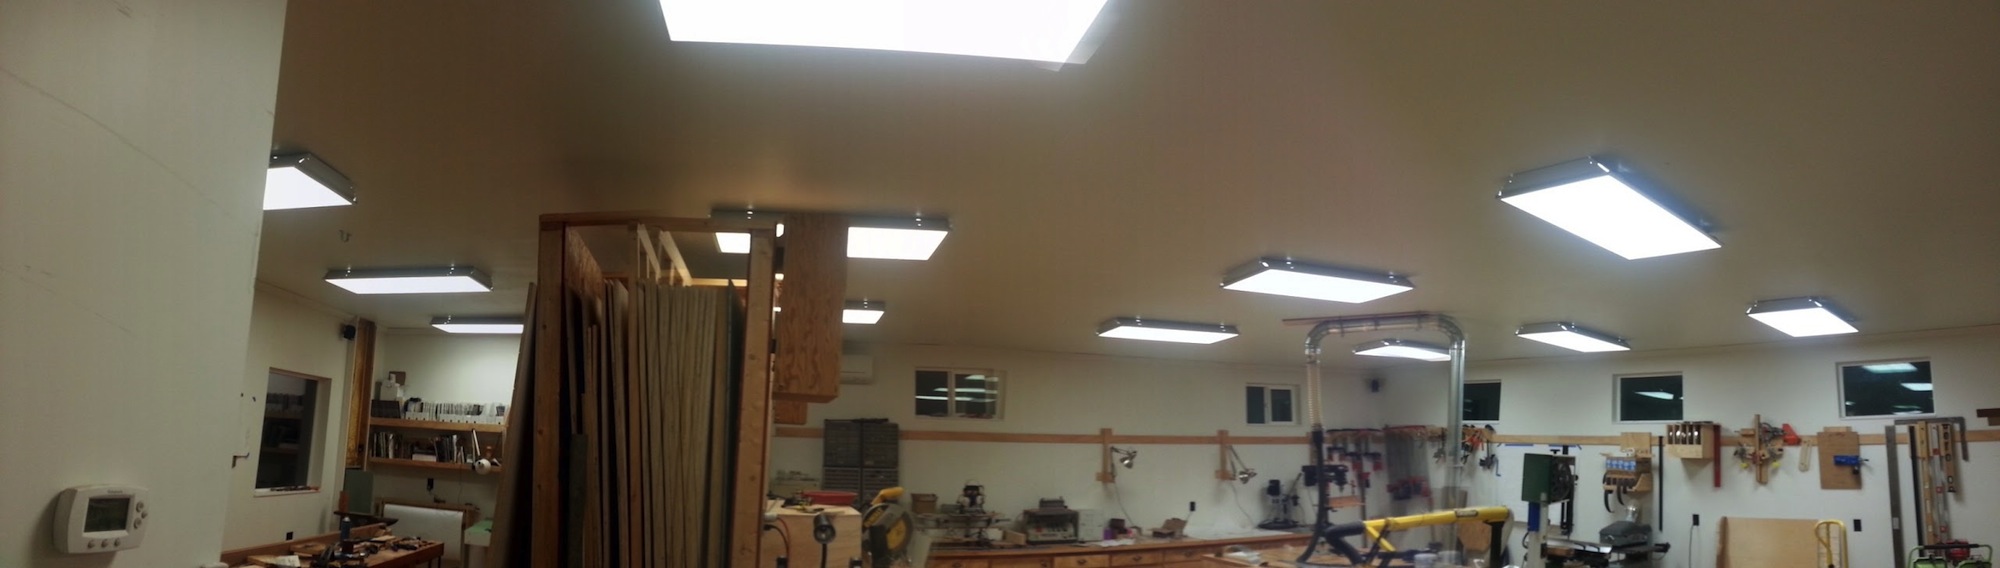 Shop Lighting For Woodworkers The Wood Whisperer